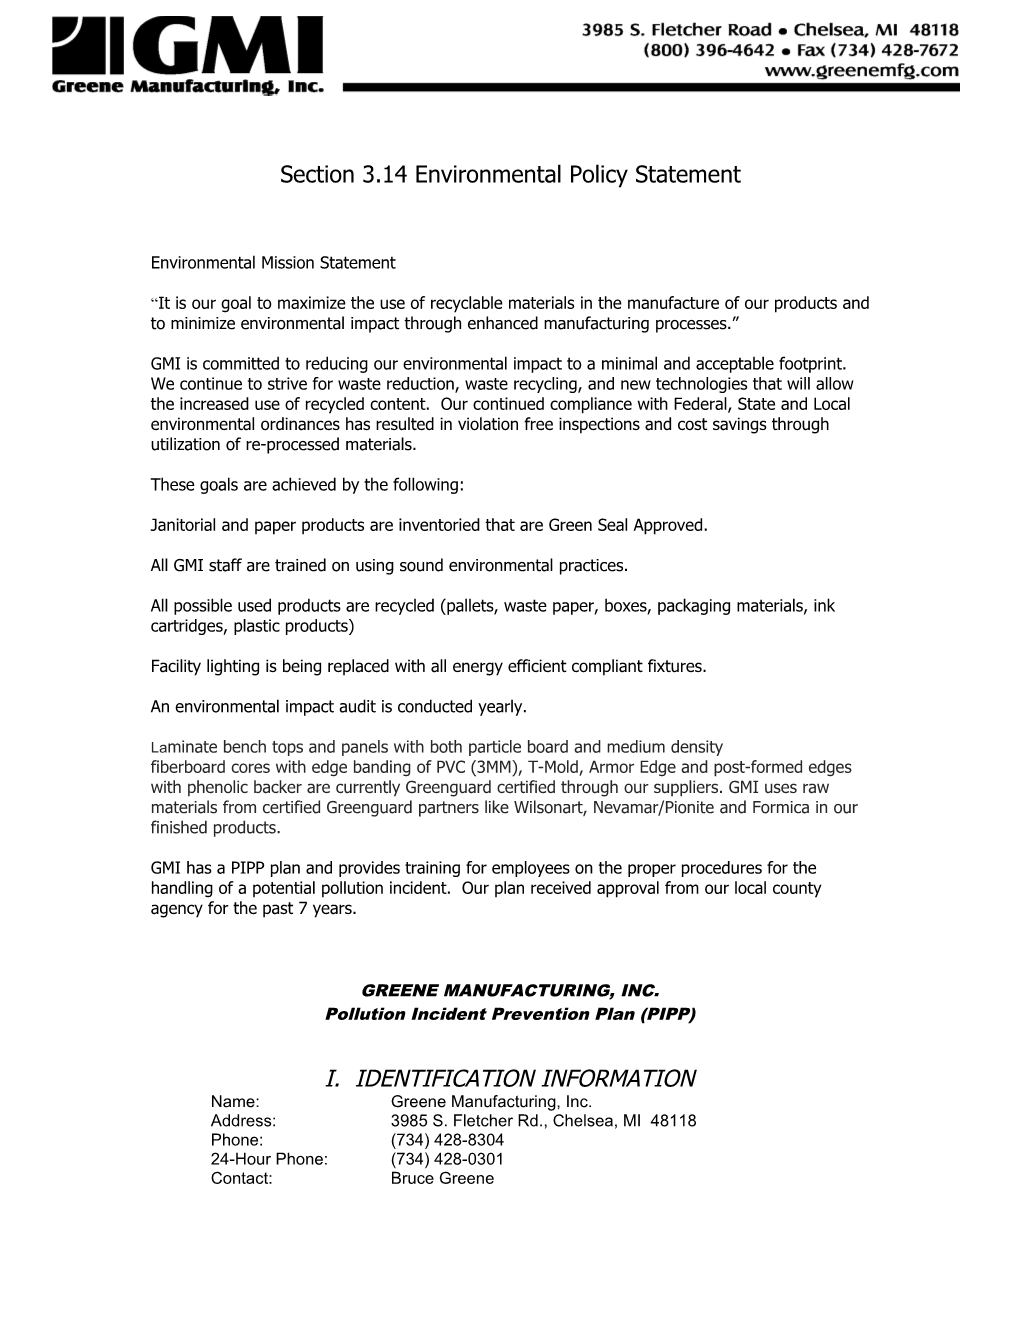 Section 3.14 Environmental Policy Statement Environmental Mission Statement